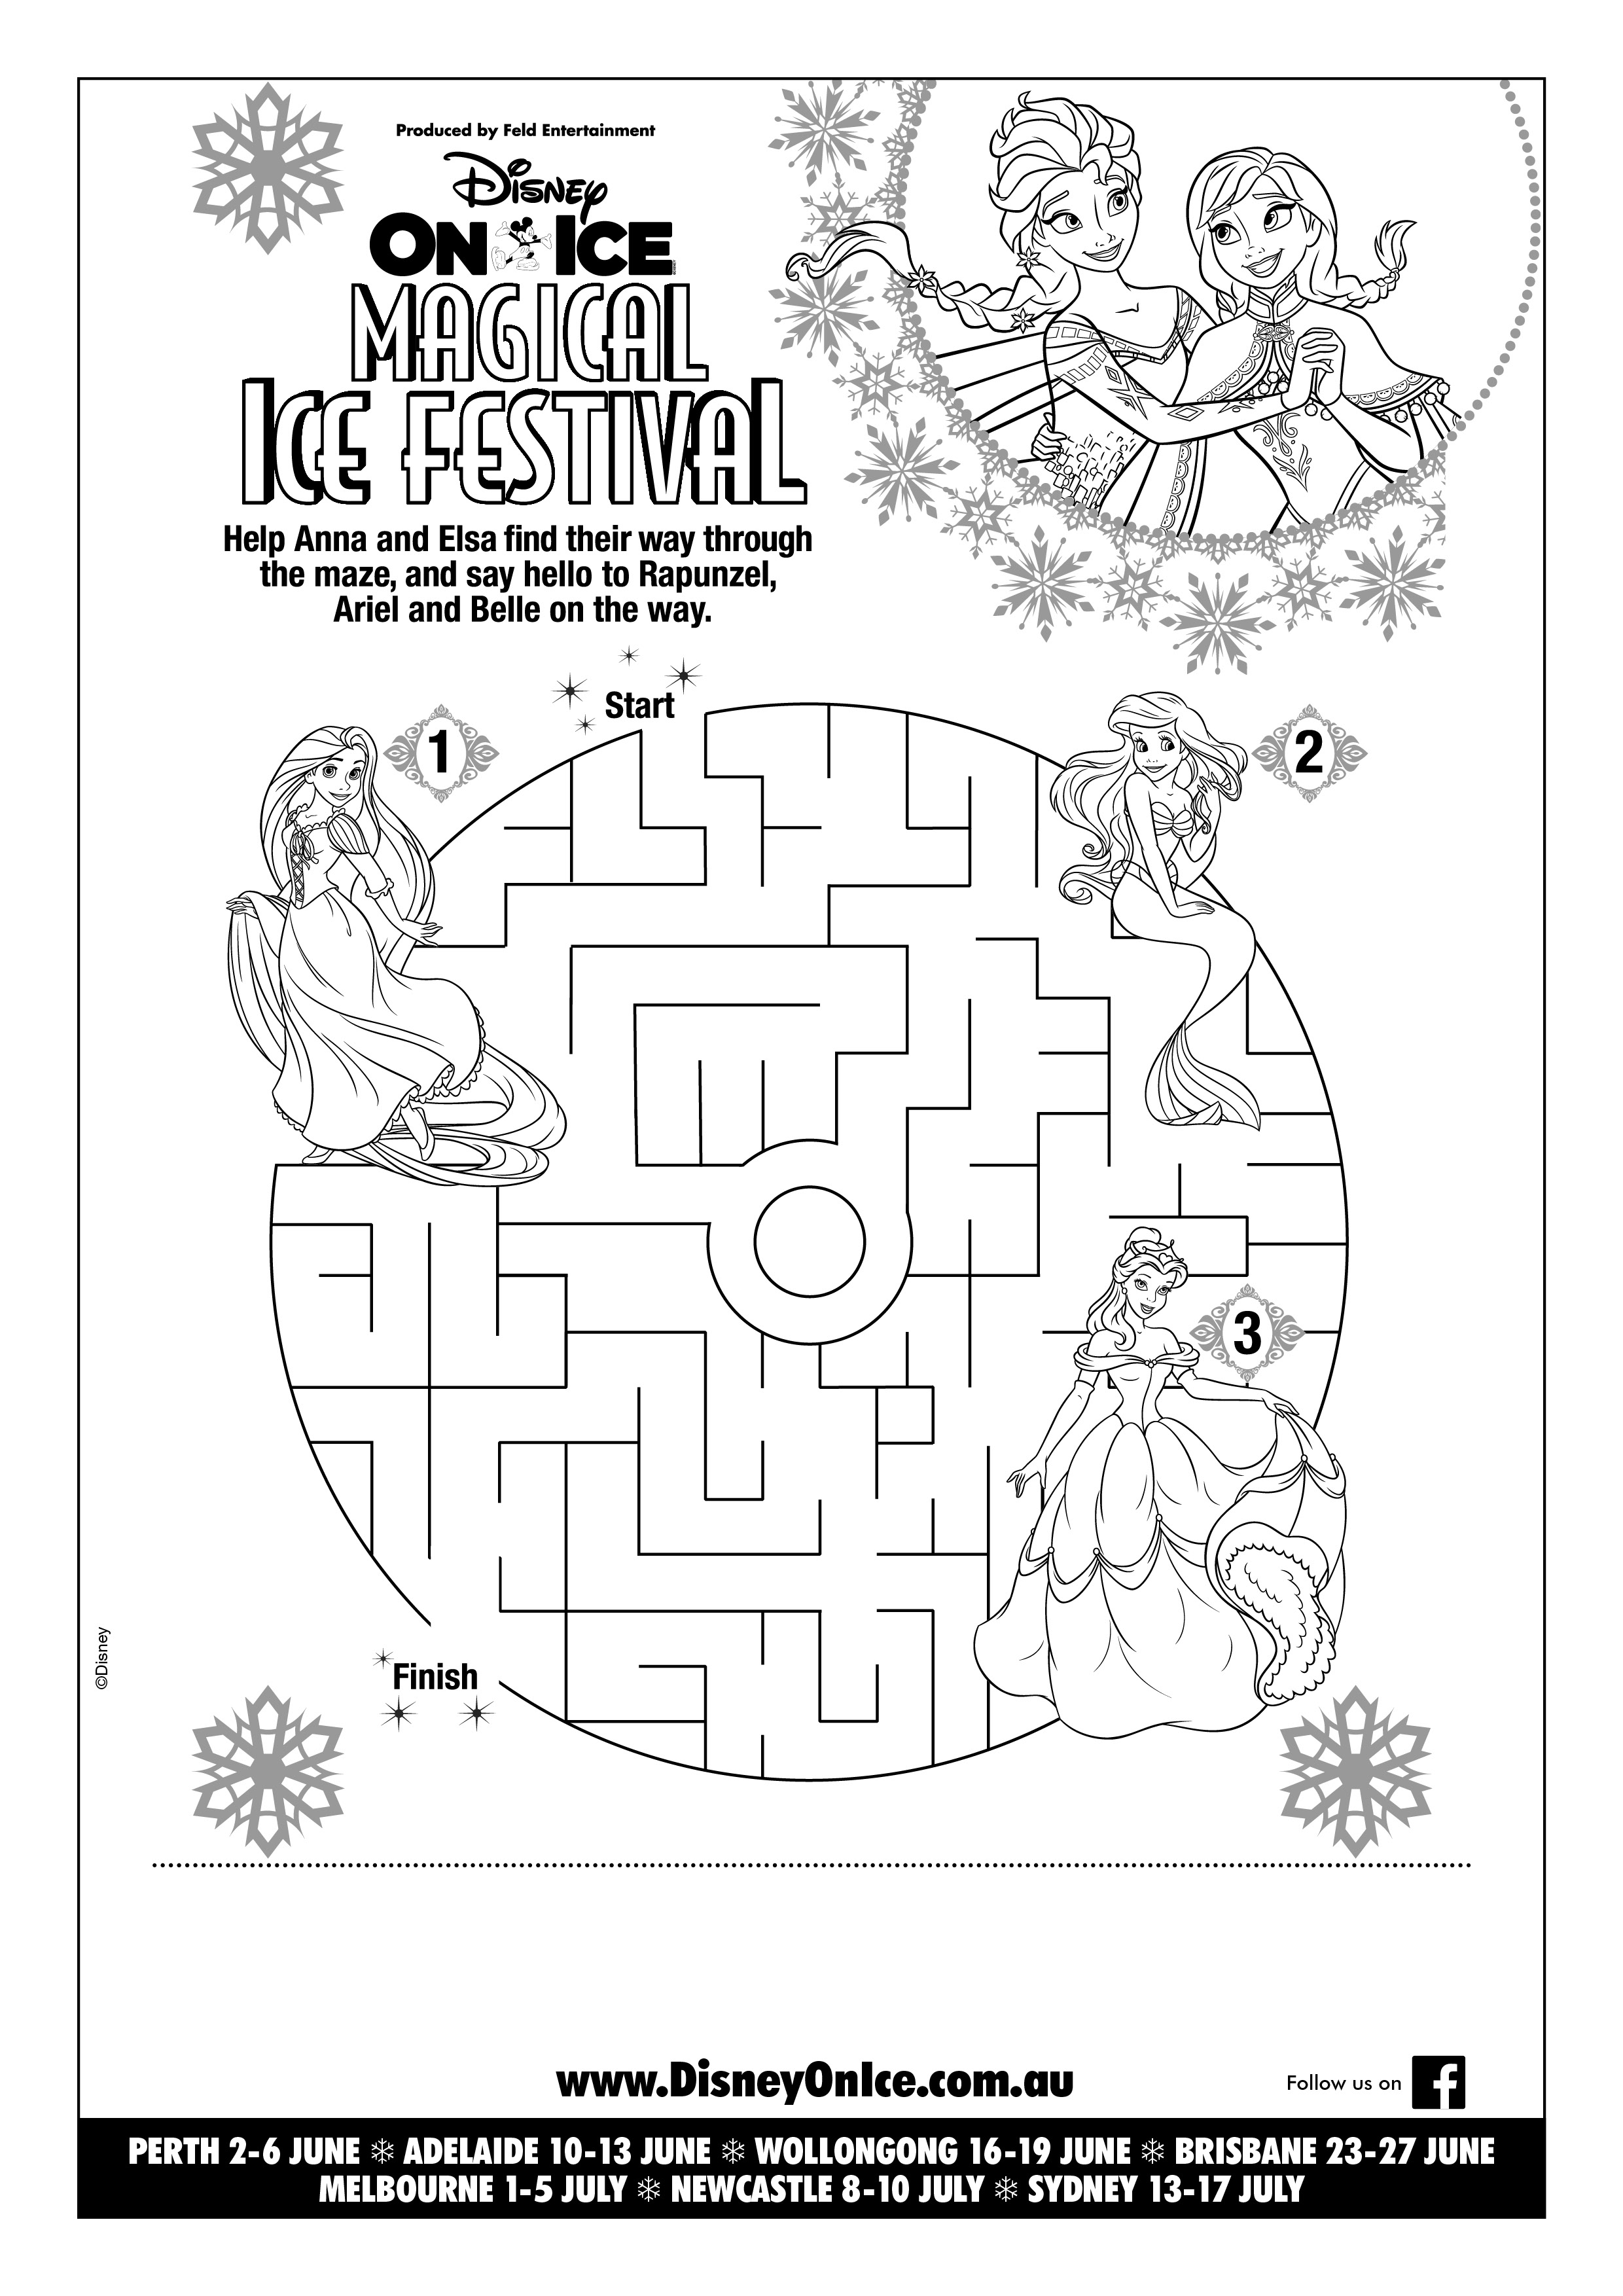 Awesome FREE Printable Disney On Ice Activity Sheets Plus Your Chance